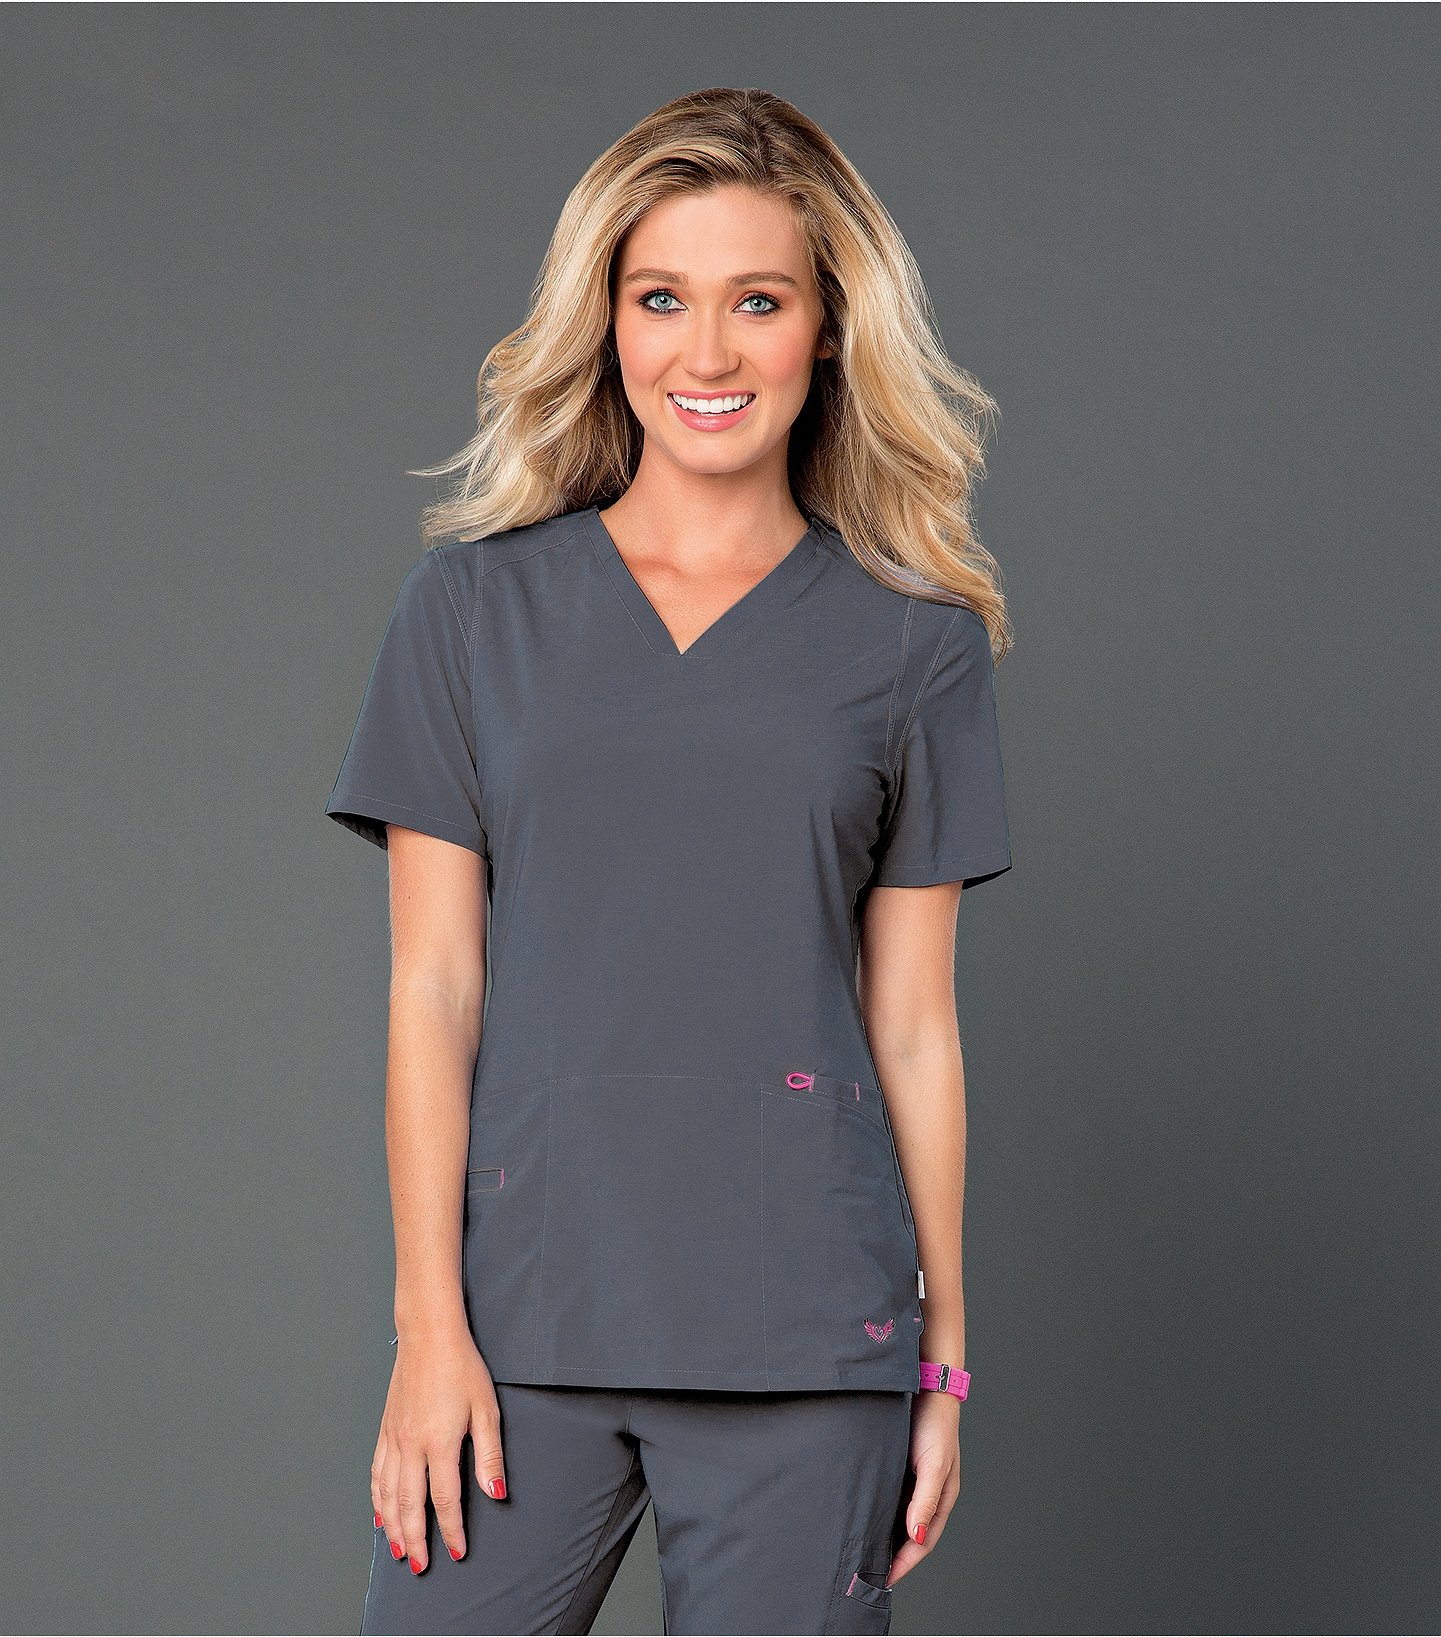 Smitten Women S Solid Athletic Fit V Neck Scrub Top S101002 Medical